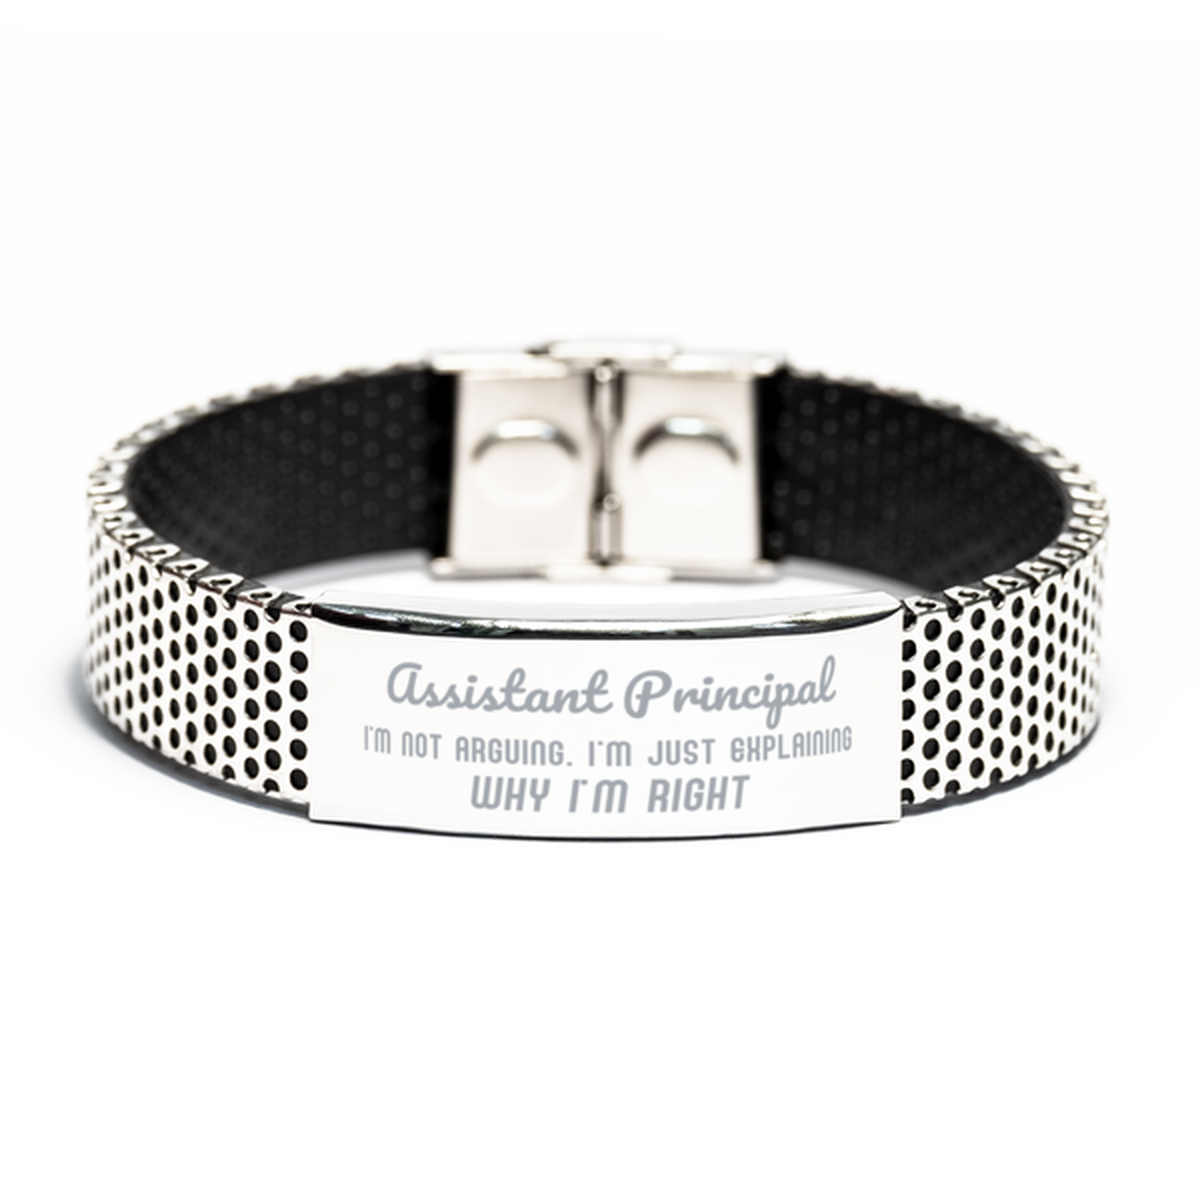 Assistant Principal I'm not Arguing. I'm Just Explaining Why I'm RIGHT Stainless Steel Bracelet, Funny Saying Quote Assistant Principal Gifts For Assistant Principal Graduation Birthday Christmas Gifts for Men Women Coworker